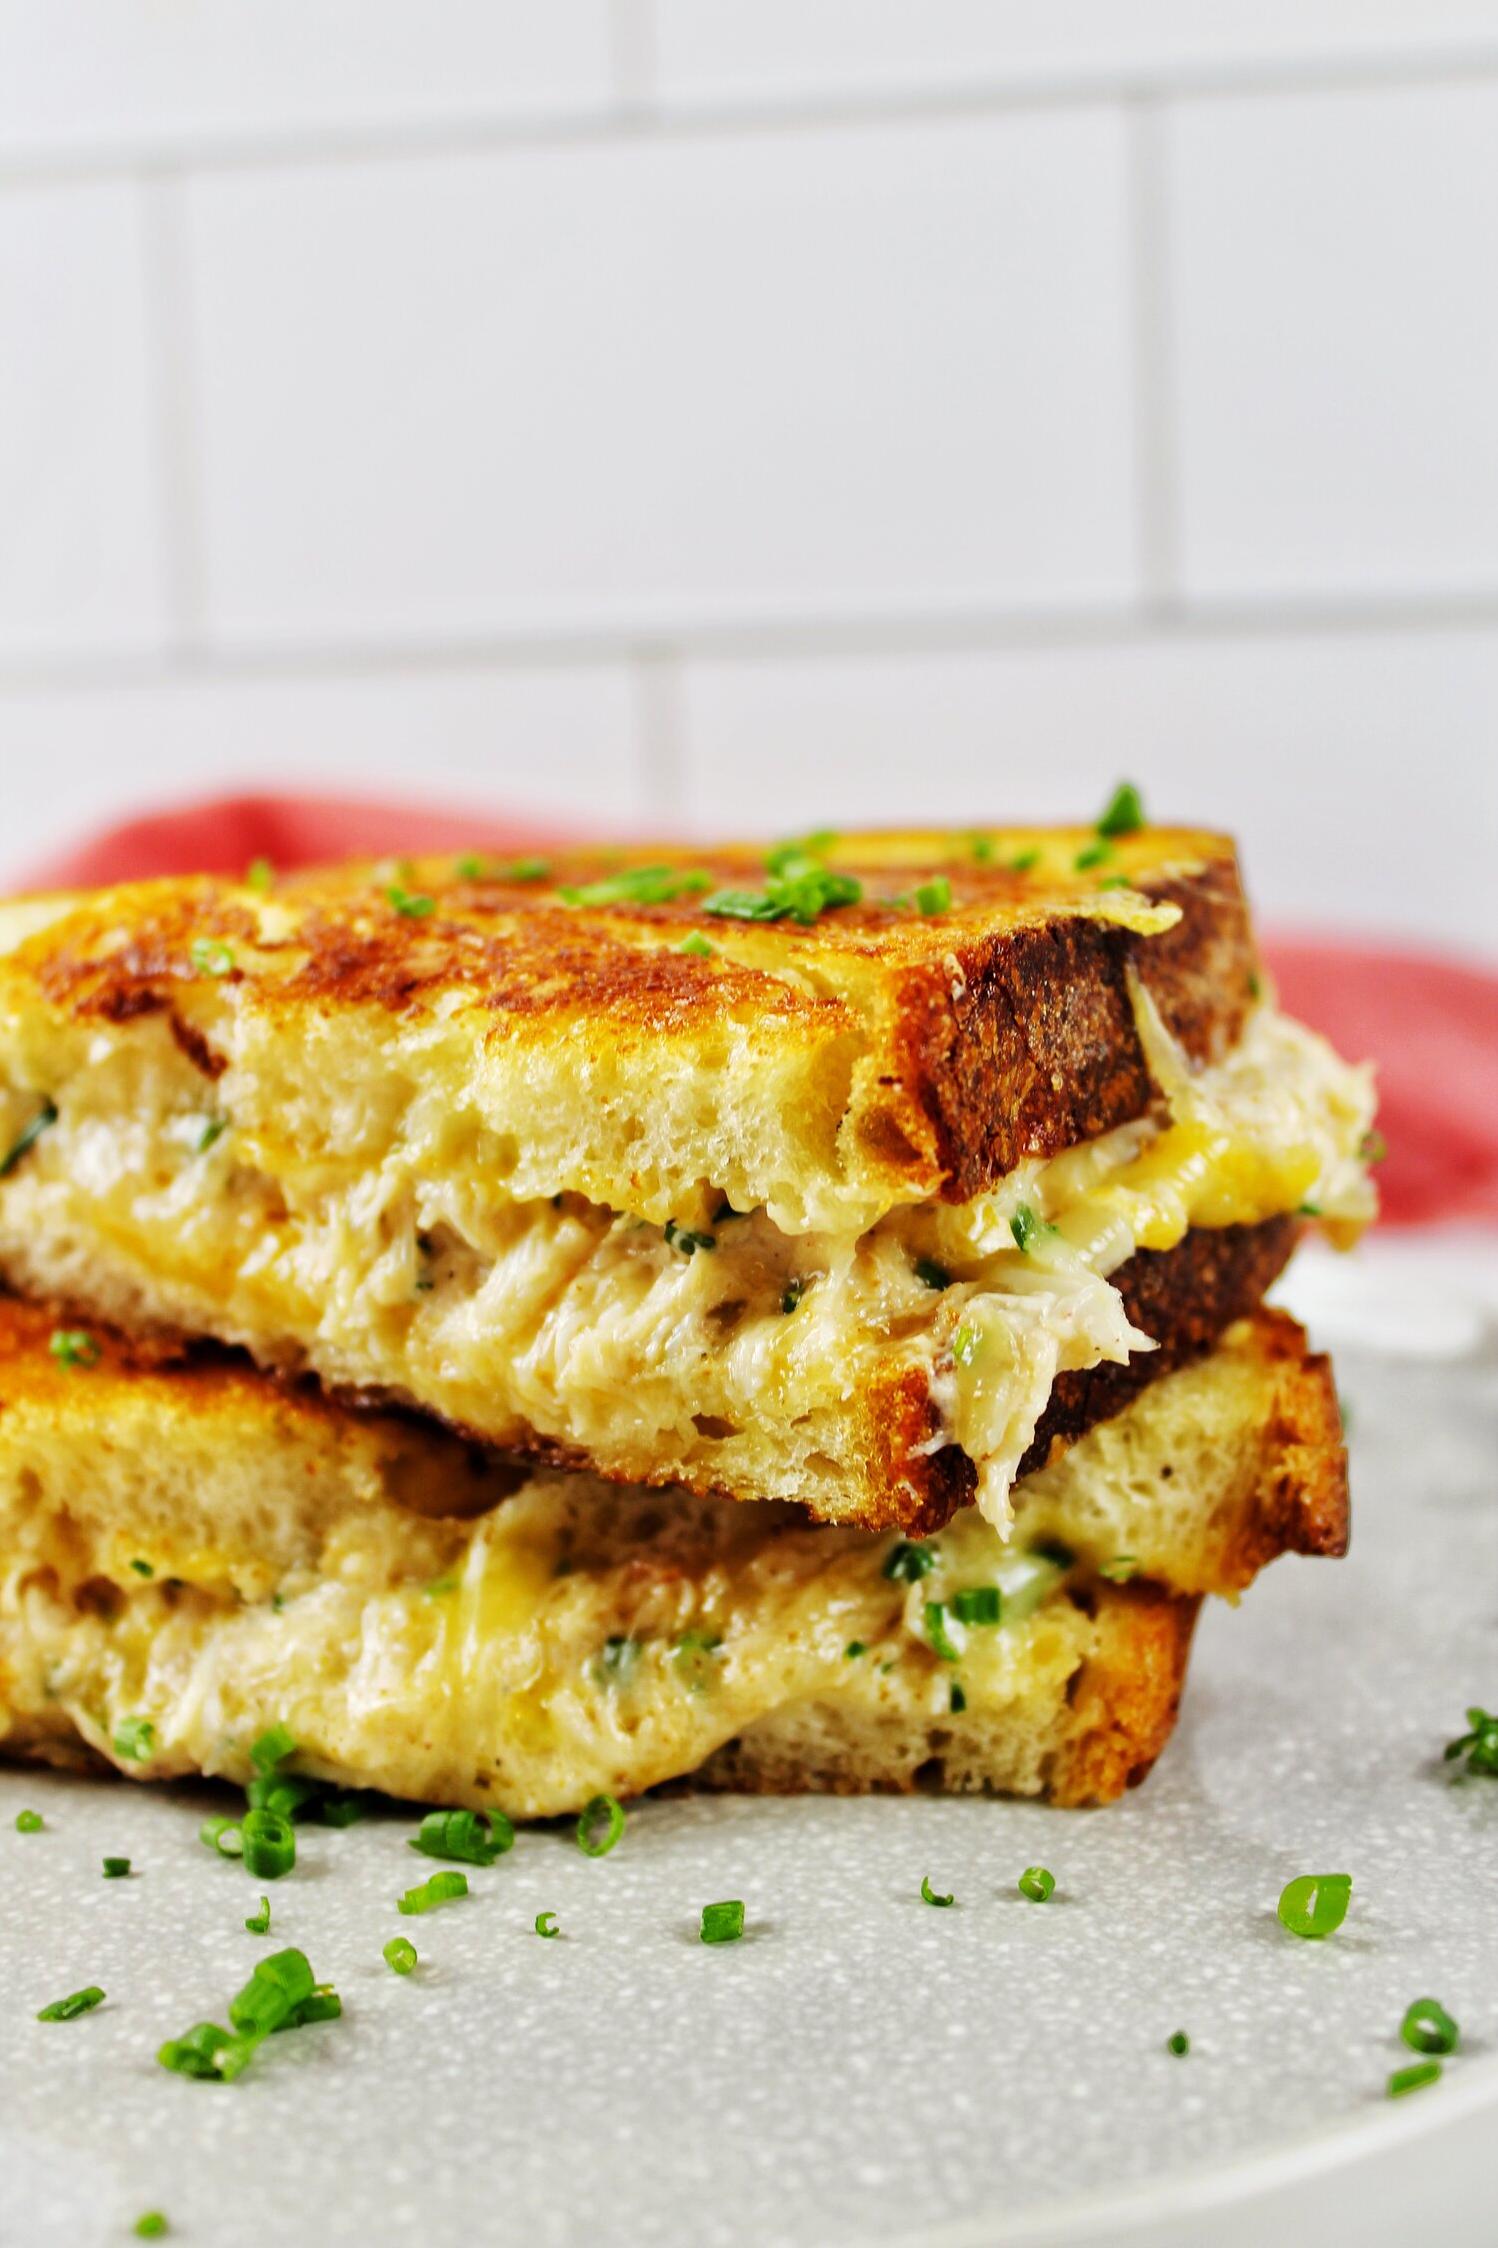  A gooey and crispy grilled cheese with a southern twist